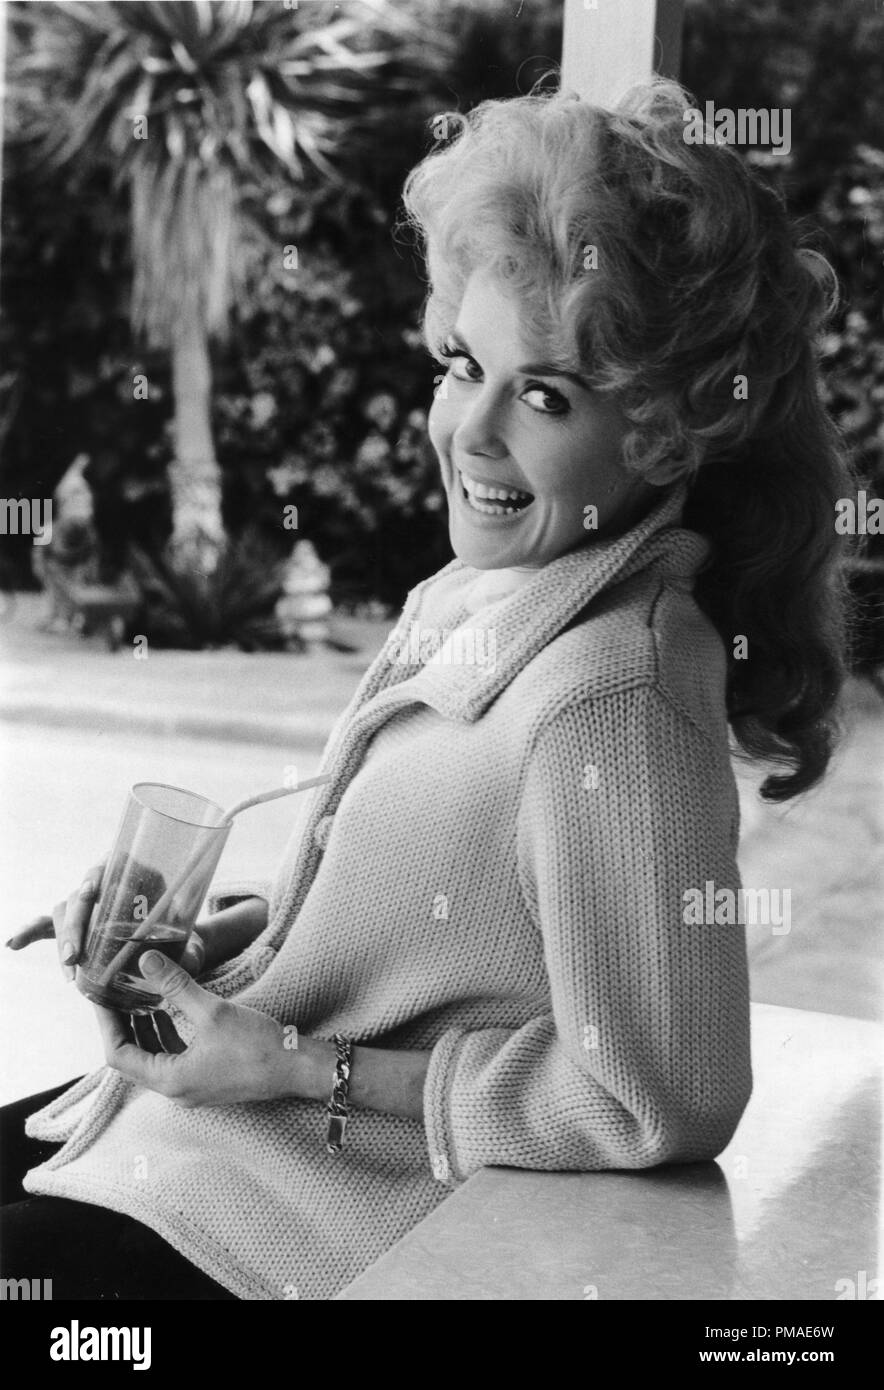 donna-douglas-from-the-beverly-hillbillies-circa-1967-file-reference-32509-628tha-PMAE6W.jpg